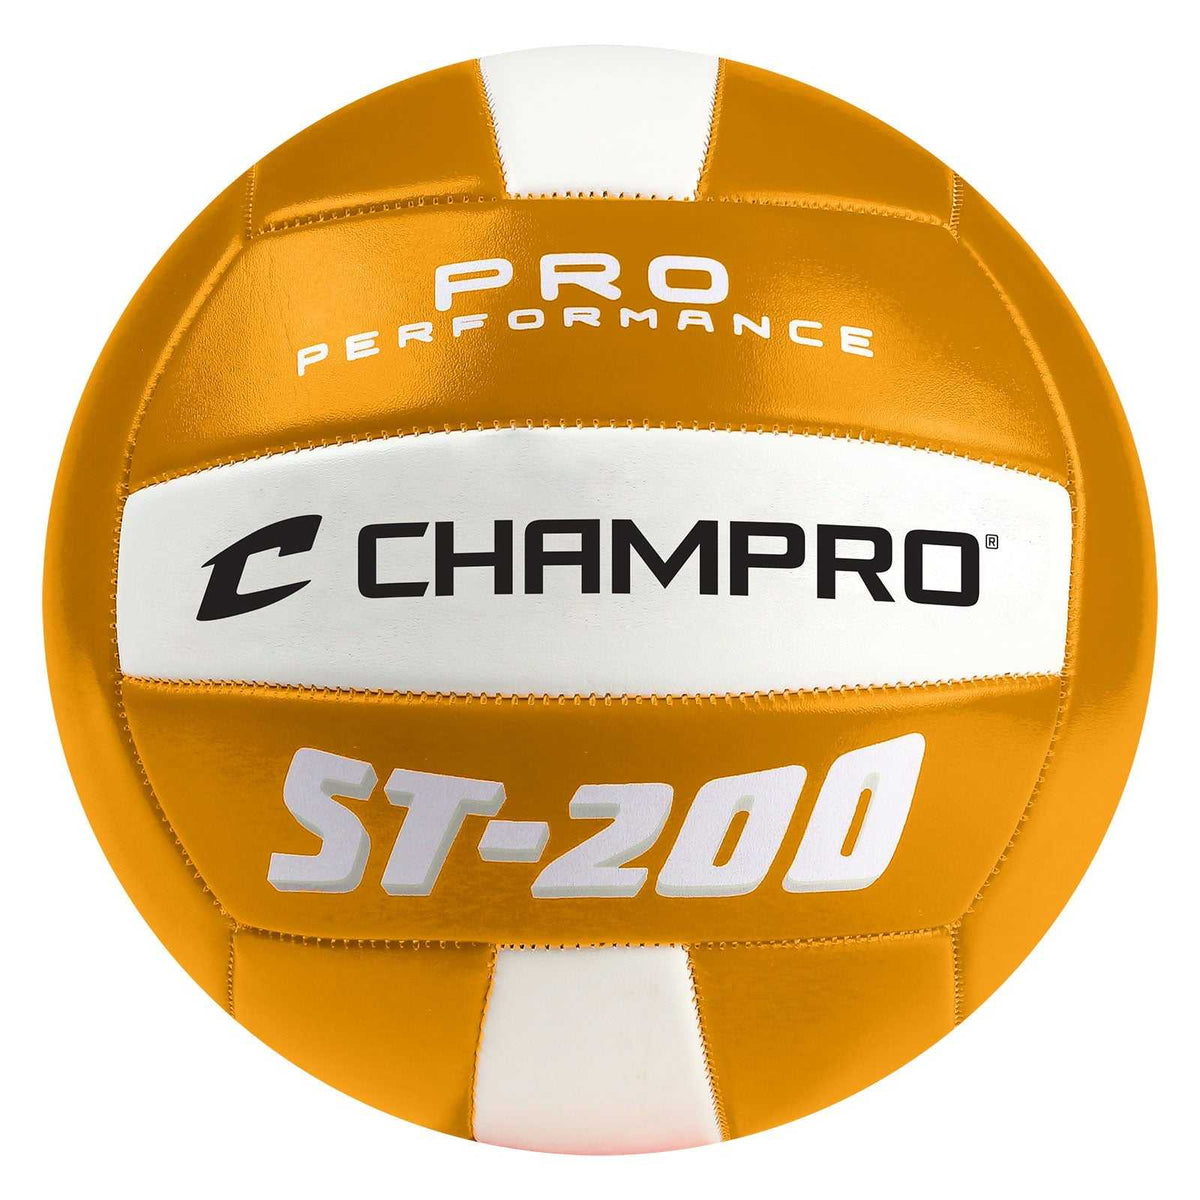 Champro VB-ST200 St200 Pro Perforamnce Volleyball - Gold - HIT a Double